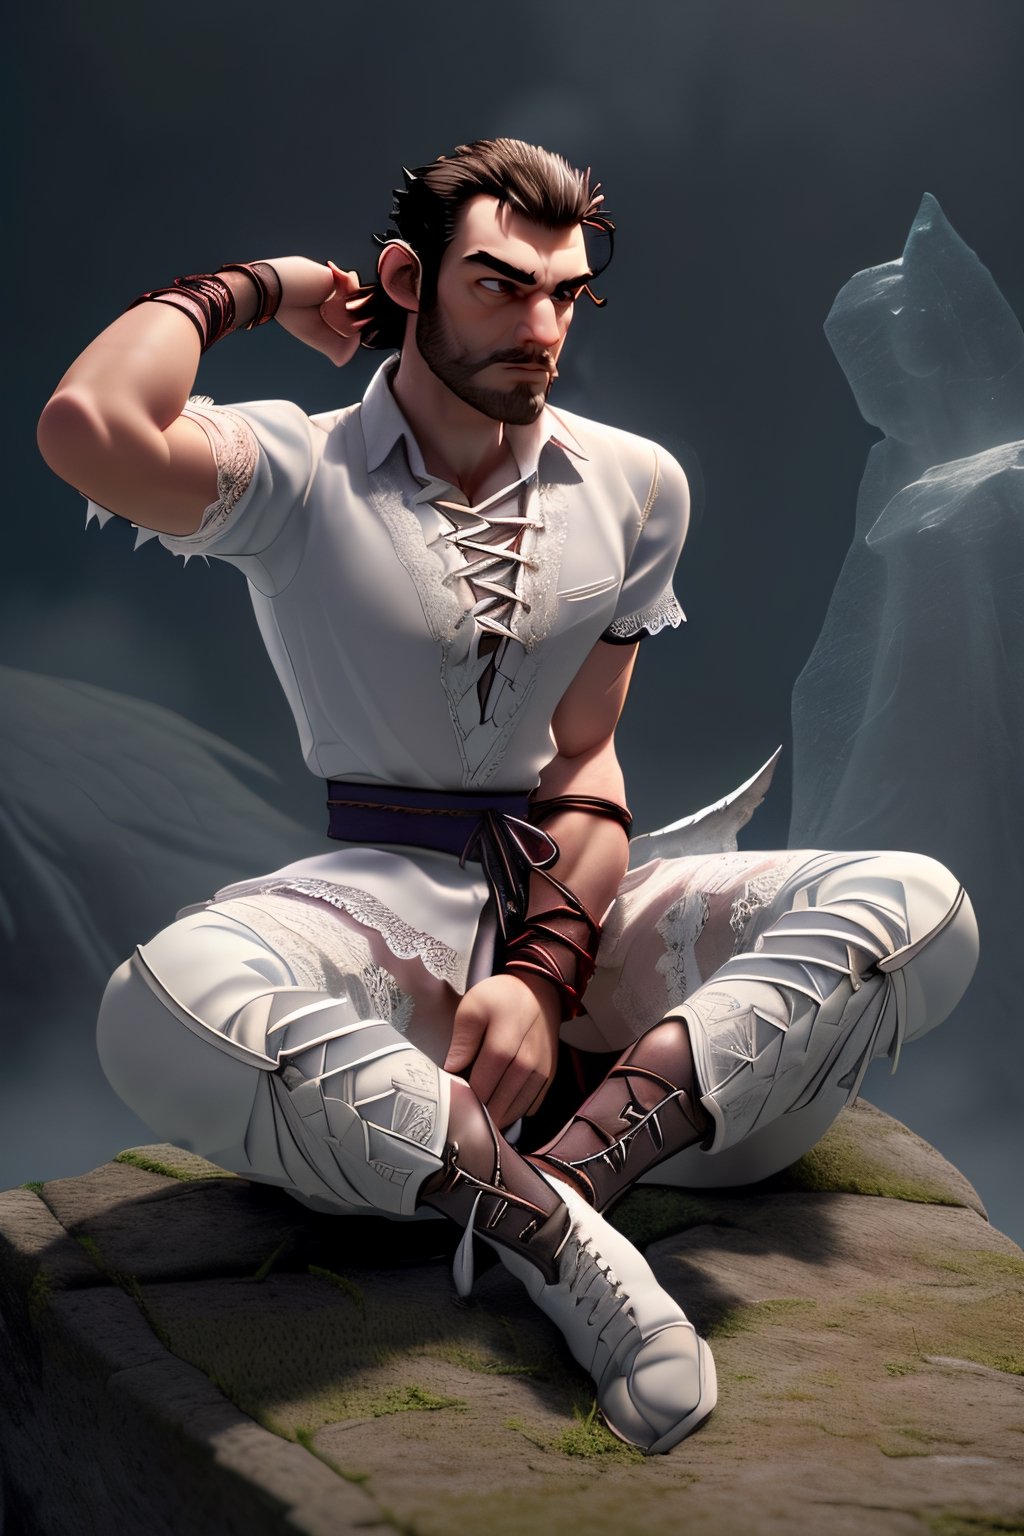 professional 3d model, solo, a grizzled fantasy martial artist meditating in a shrine, glowing battle aura, (arm made out of mist, disembodied arm background:1.4), sitting with legs crossed, wearing pants, (wearing torn white lace-up shirt:1.5), wild hair, (bushy sideburns:1.5), octane render, highly detailed, volumetric, dramatic lighting